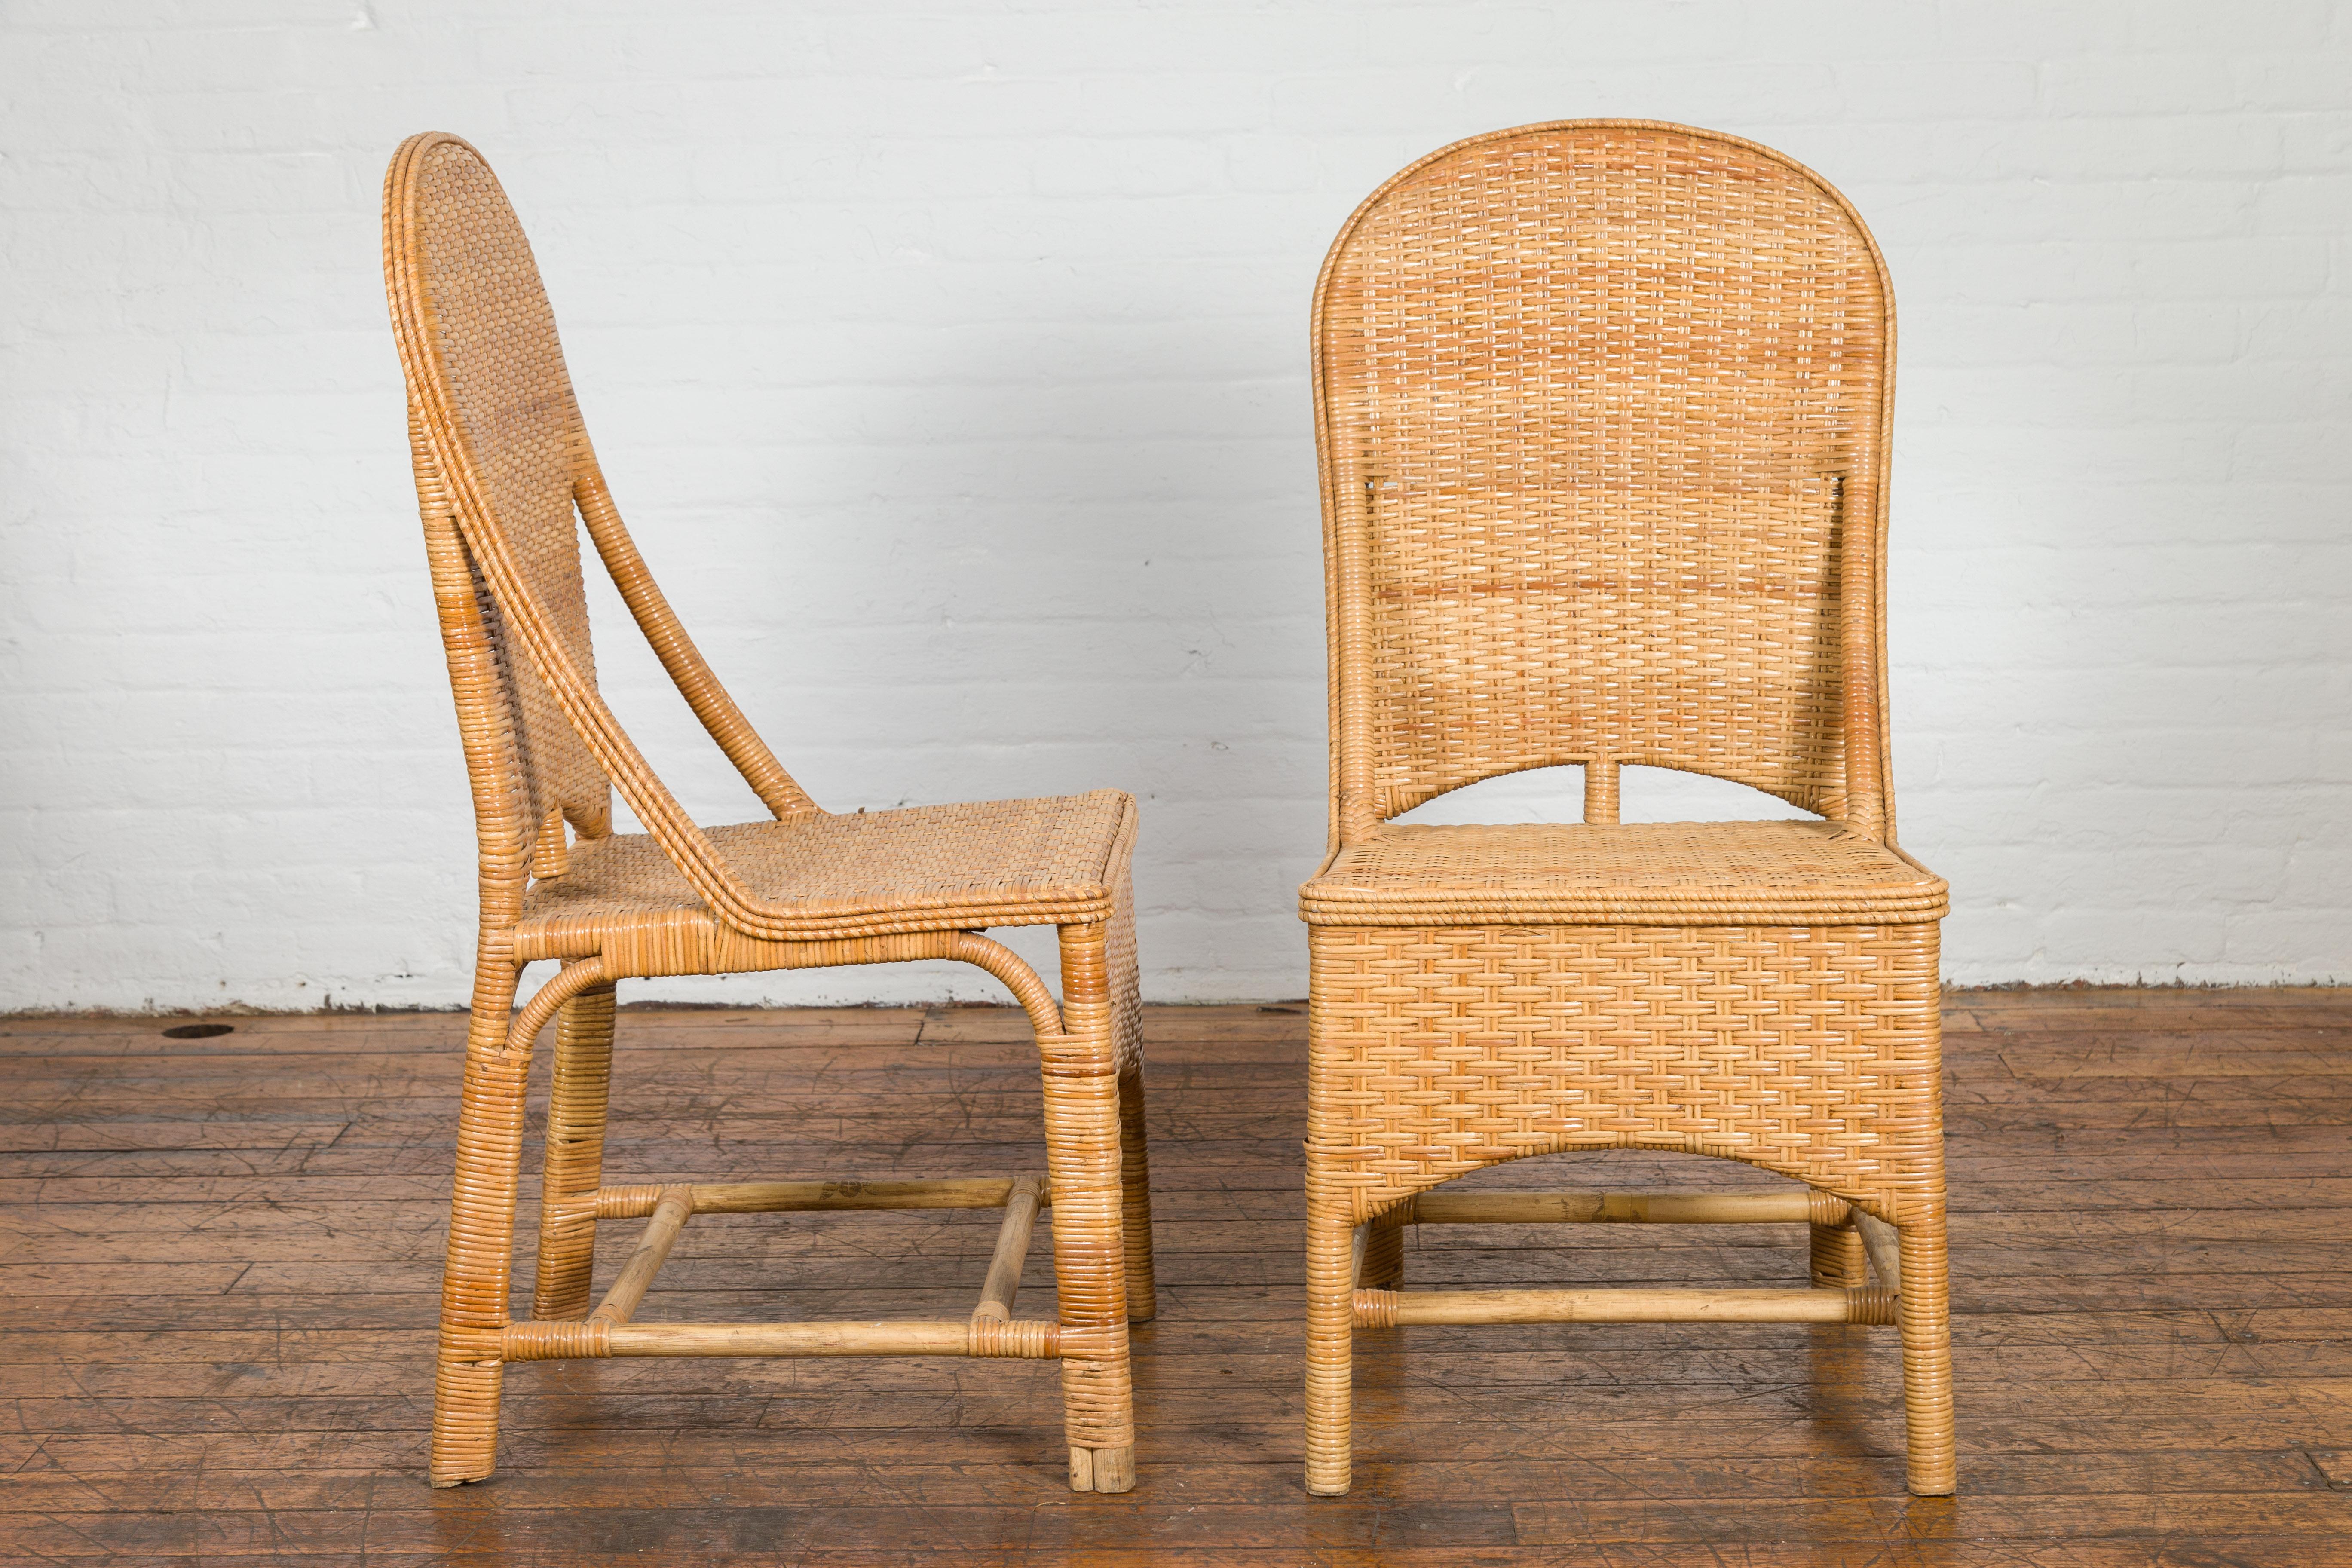 1950s Midcentury Country Style Woven Rattan Rustic Chairs, Pair For Sale 5